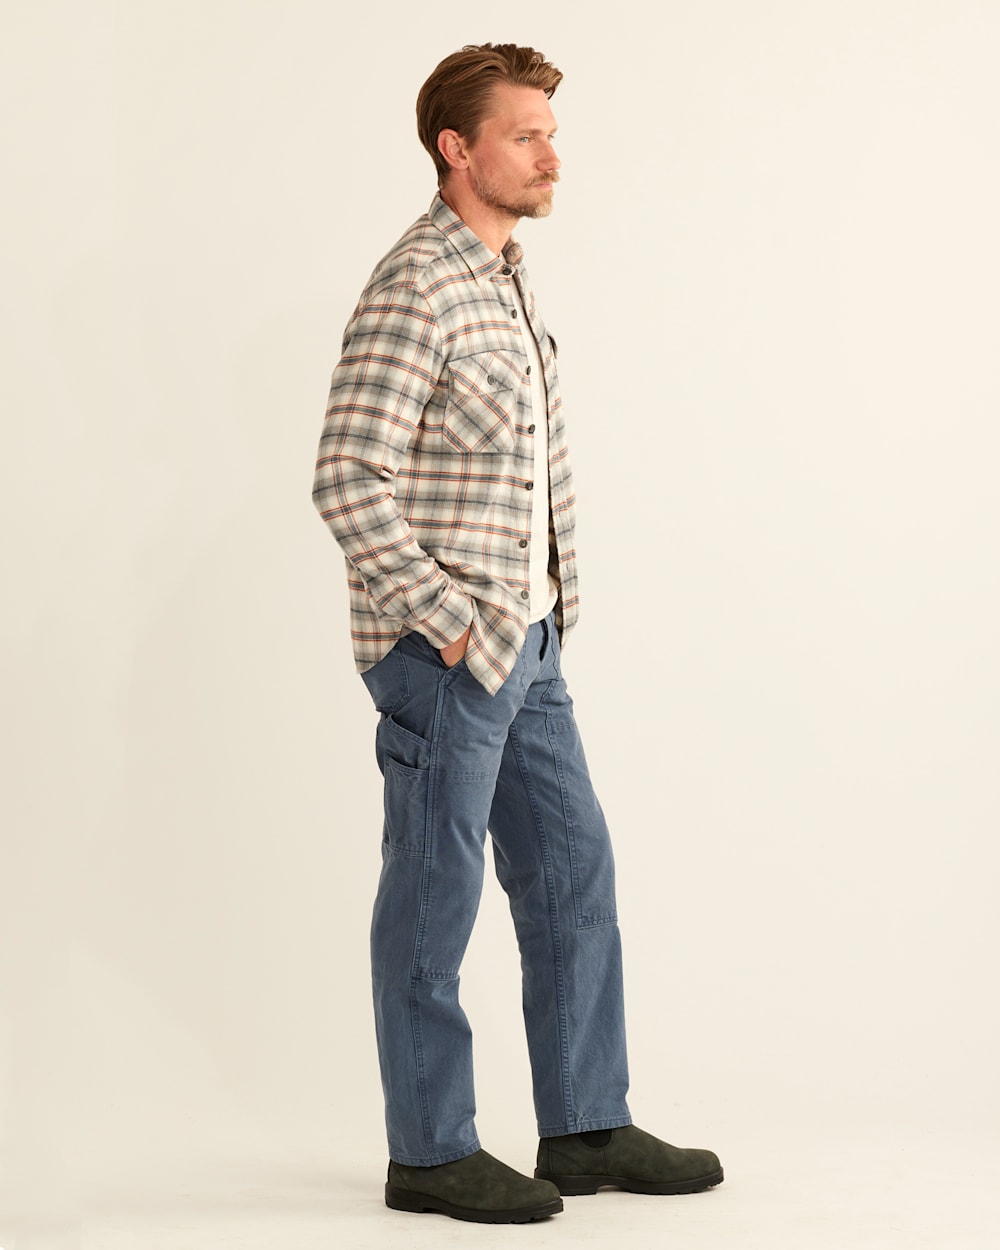 ALTERNATE VIEW OF MEN'S PLAID BURNSIDE DOUBLE-BRUSHED FLANNEL SHIRT IN BIRCH/GREY/RED PLAID image number 2